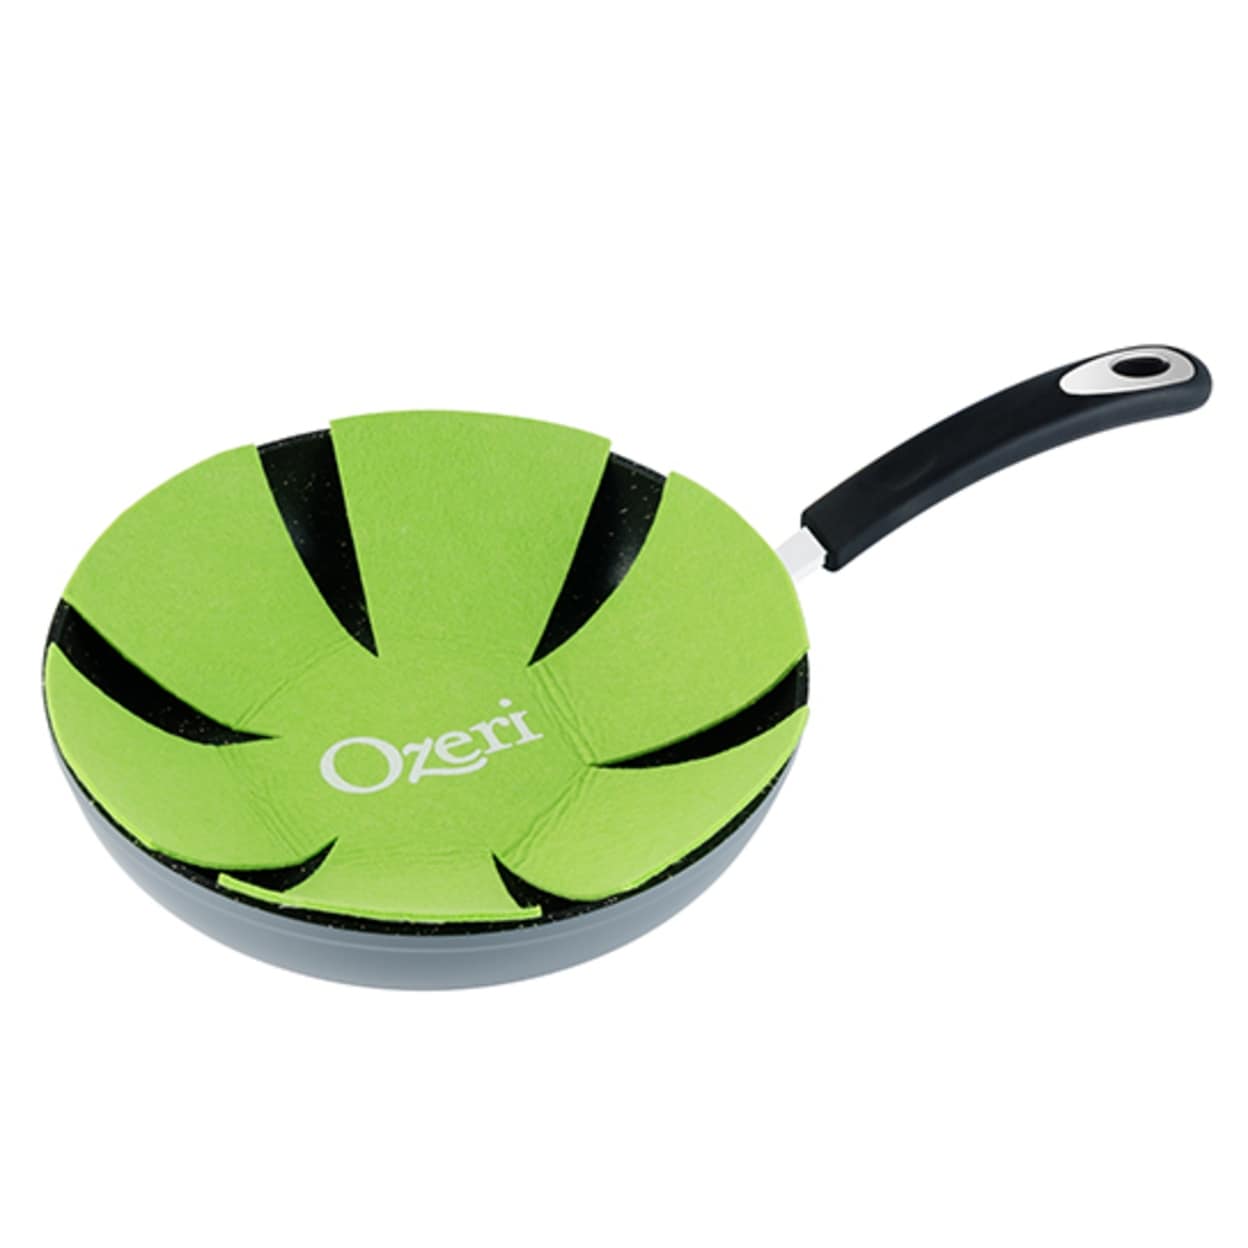 https://ak1.ostkcdn.com/images/products/is/images/direct/8158f7b092560b2feb5d54f219a5089fa2fb946d/12%22-Stone-Earth-Frying-Pan-By-Ozeri%2C-With-100%25-Apeo-%26-Pfoa-Free-Stone-Derived-Non-Stick-Coating-From-Germany%2C-In-Granite.jpg